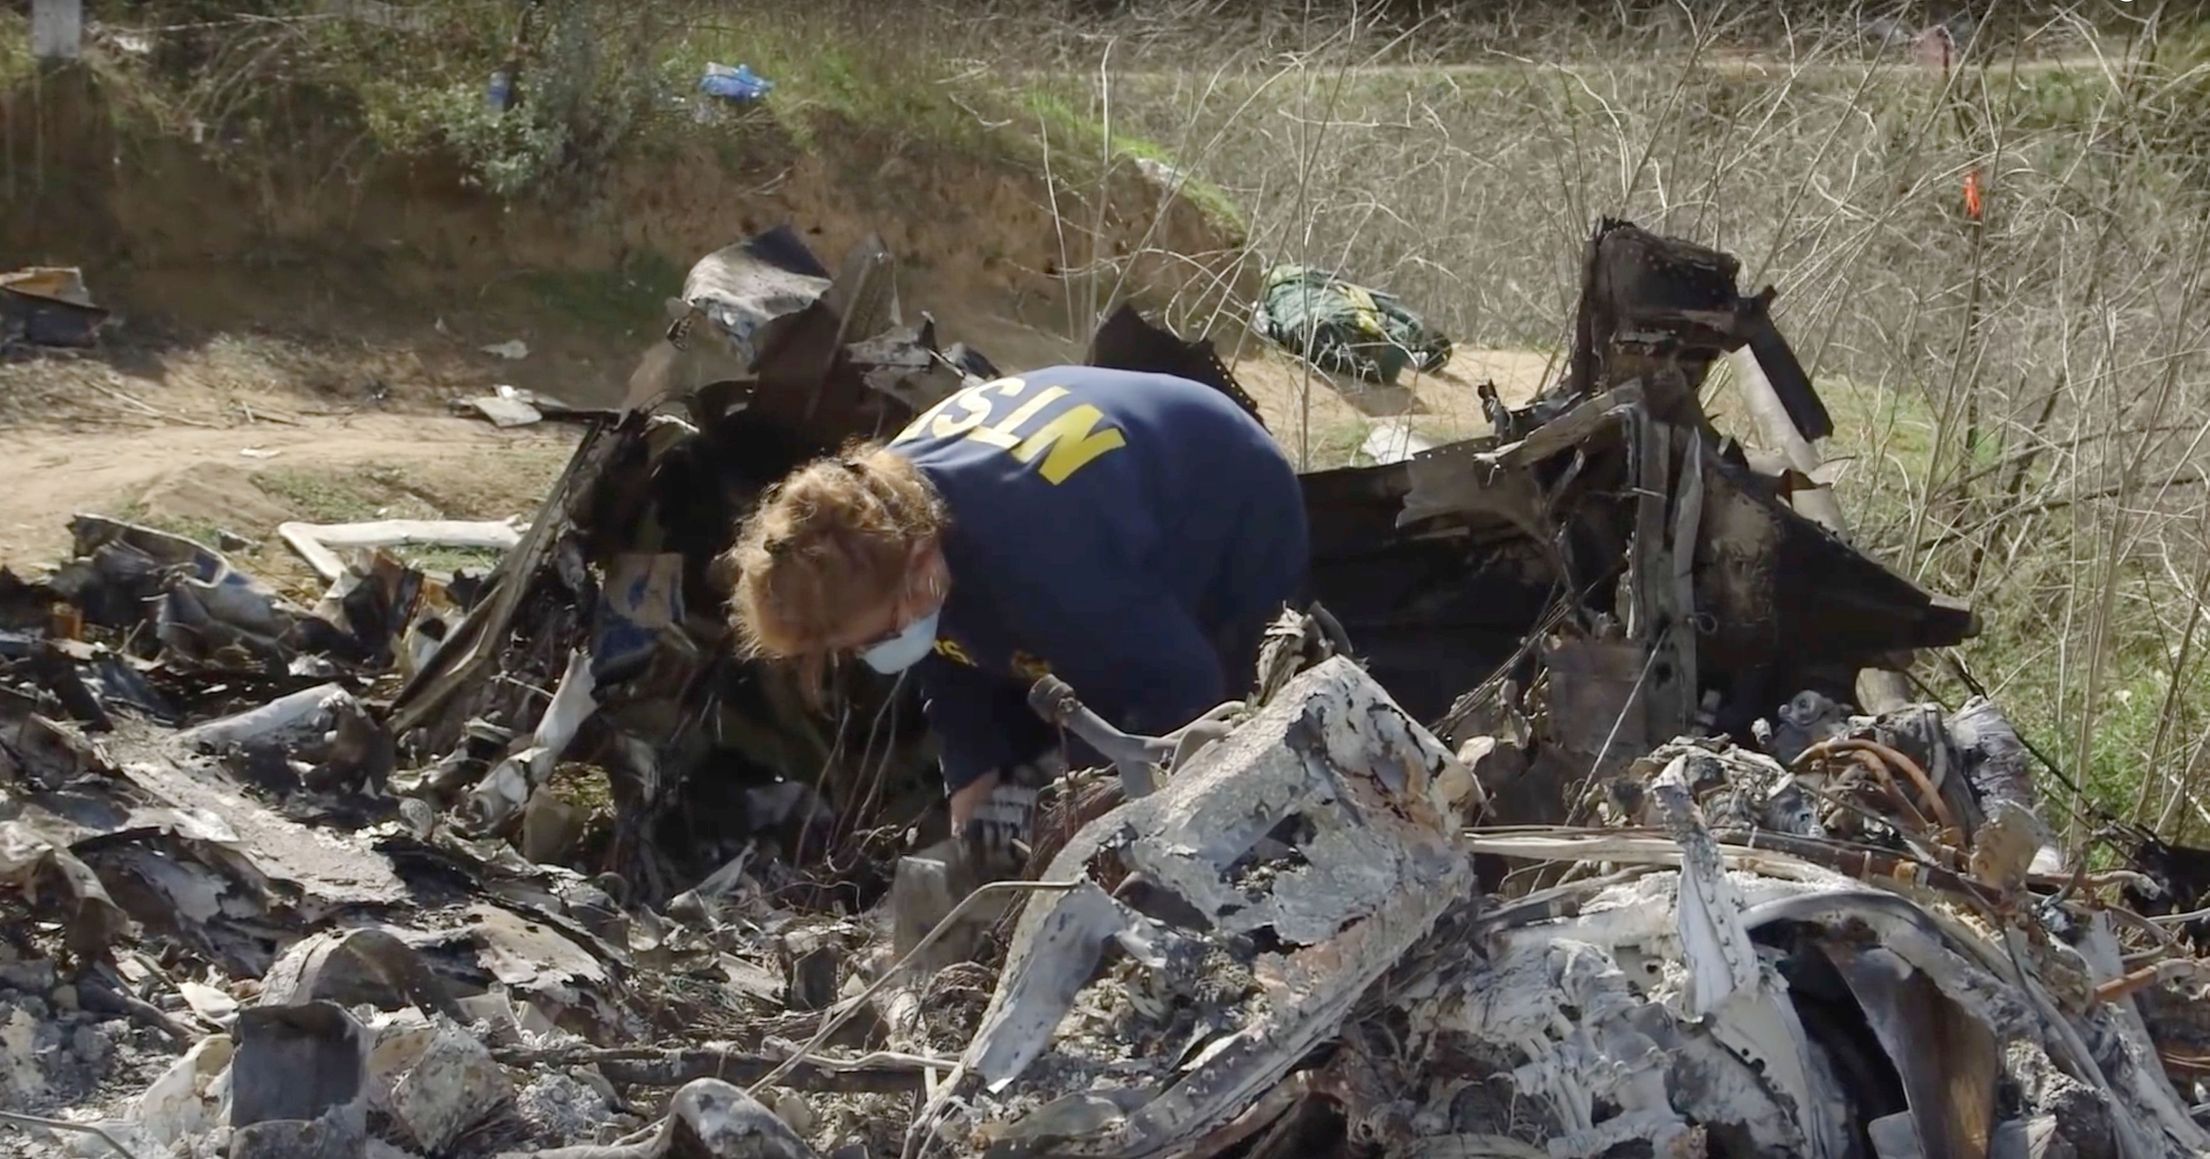 An investigator works at the site of the helicopter crash that killed Kobe Bryant and eight others in a screen grab taken in Calabasas